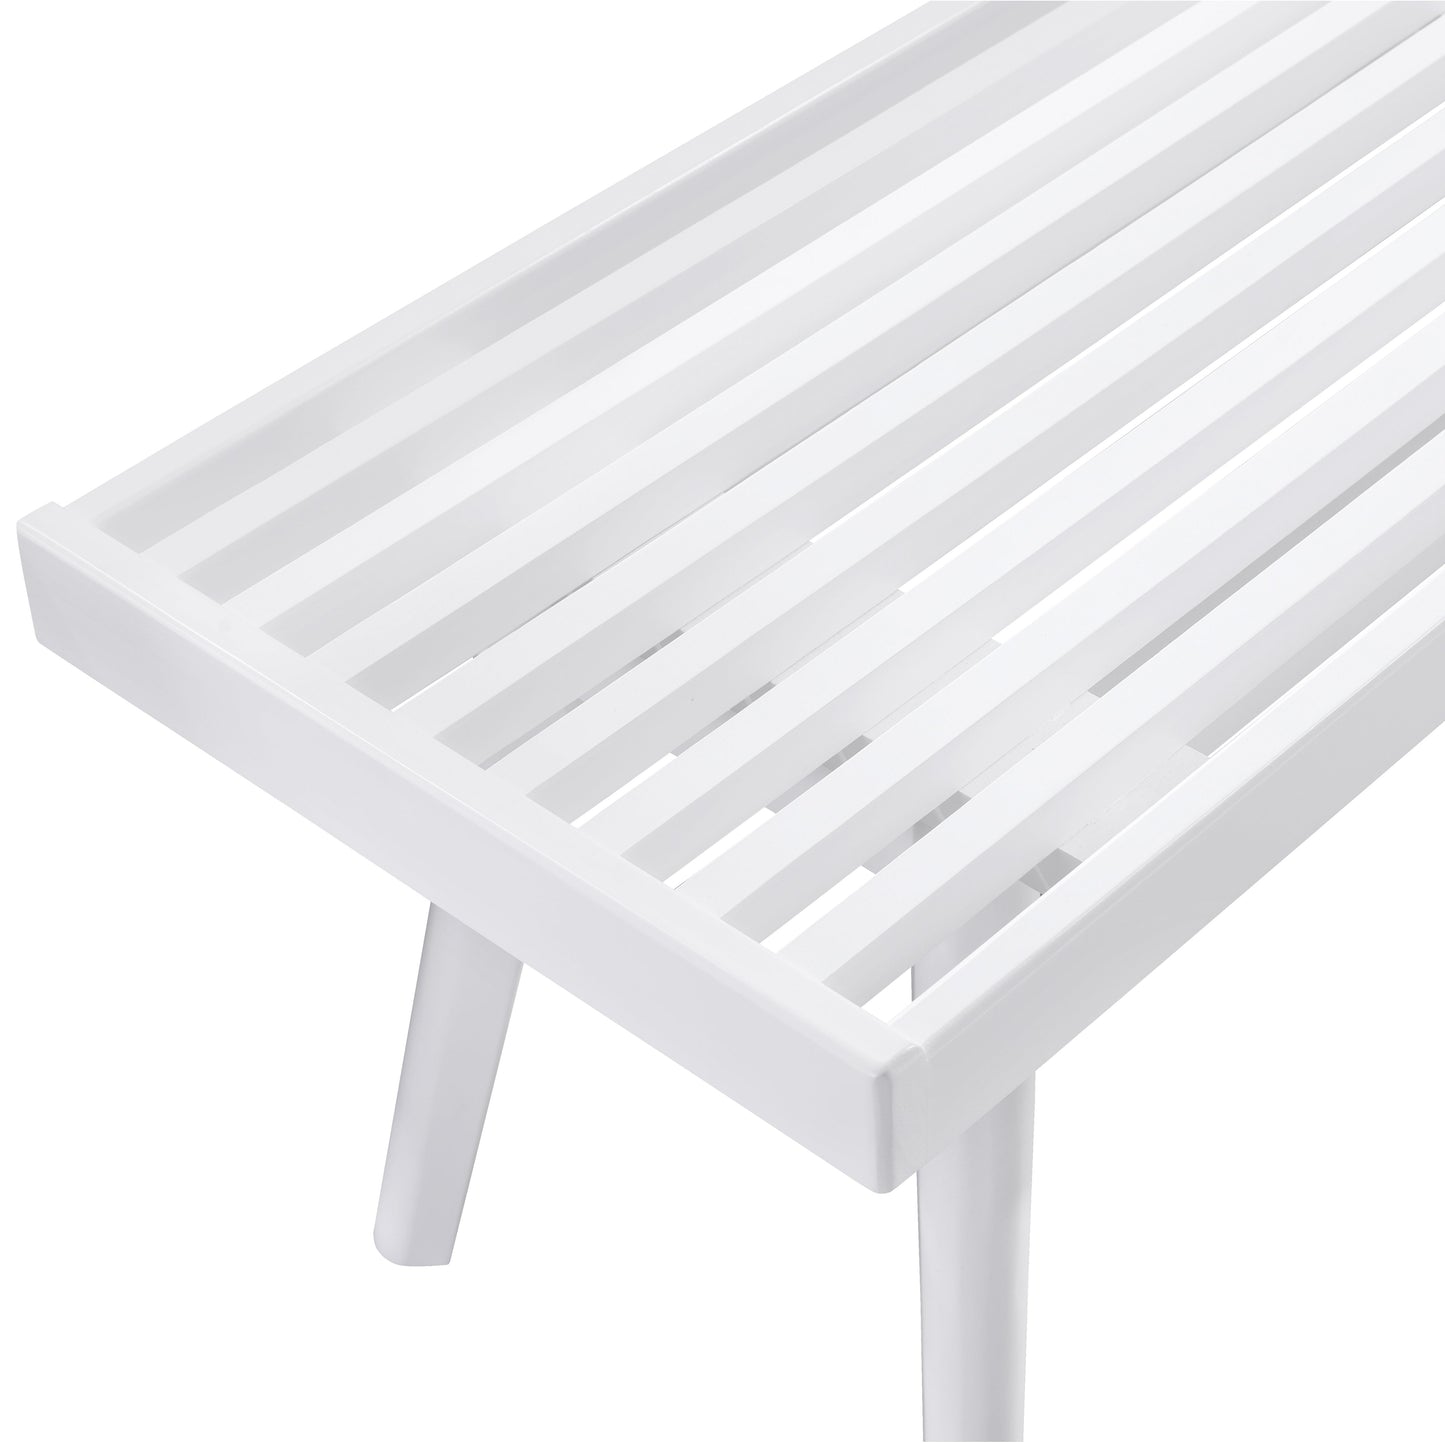 Larwich Solid Wood Slatted Bench, 41.30-Inch Long, White